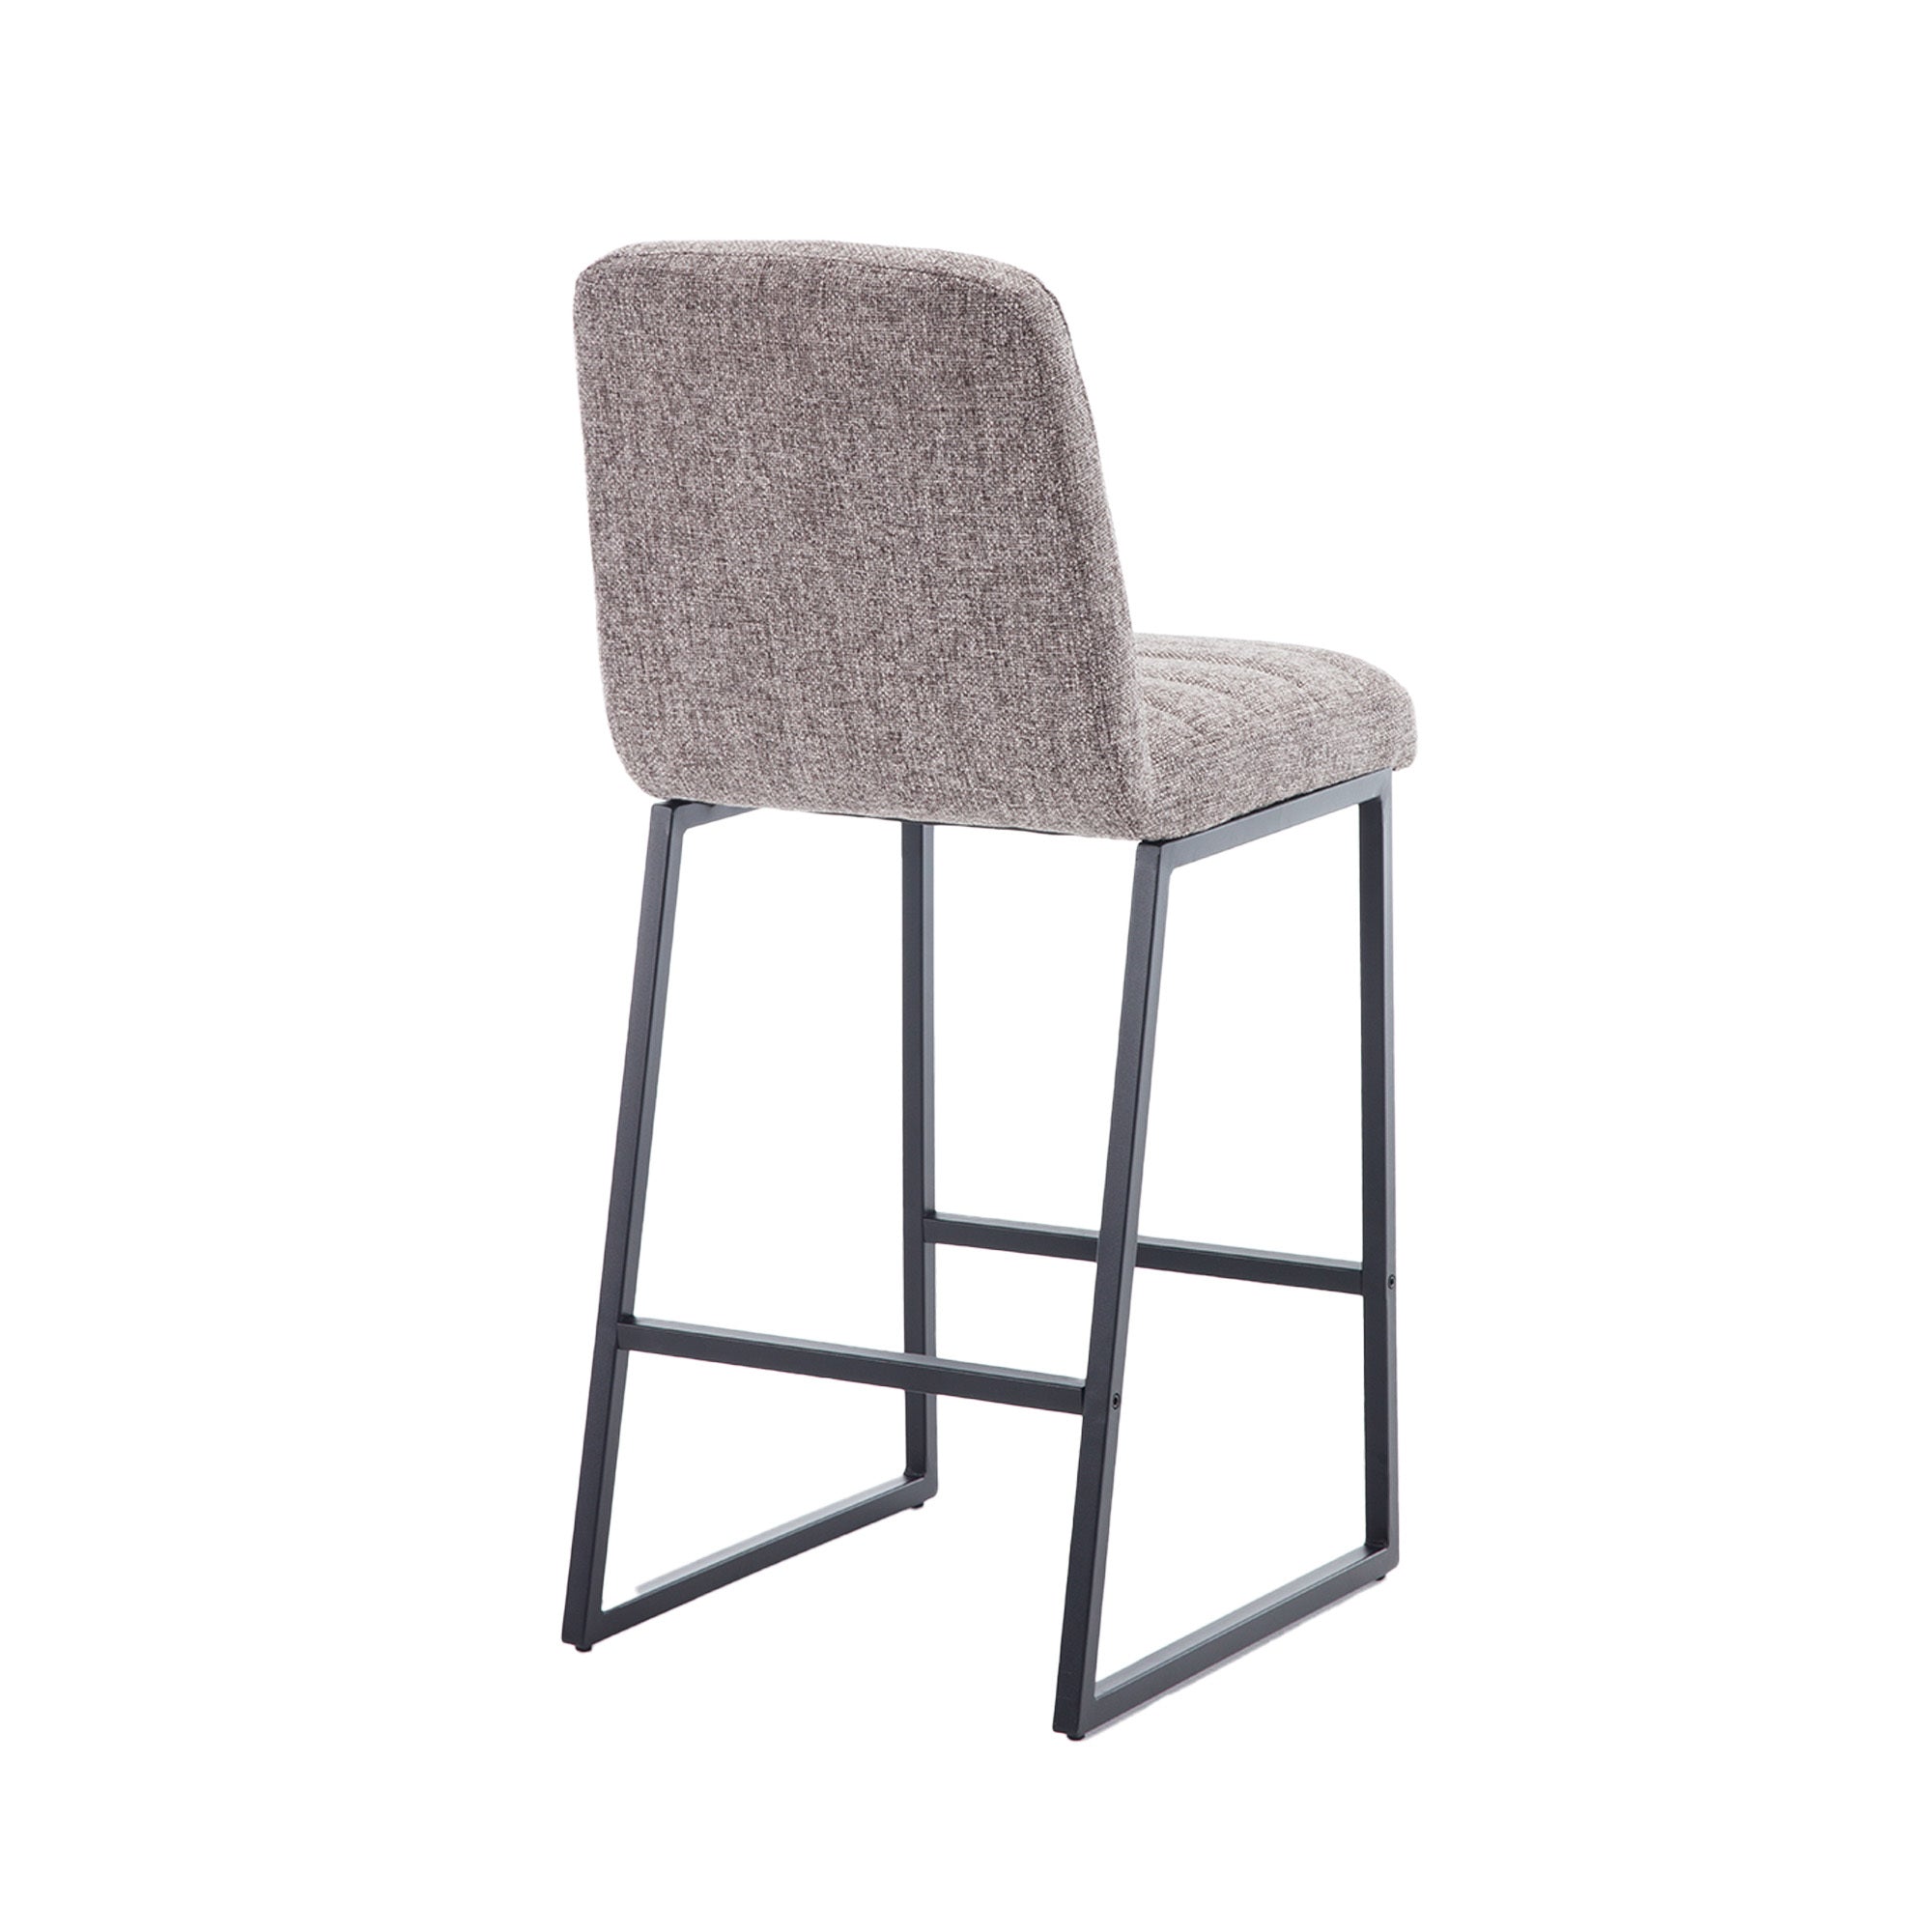 Low Bar Stools Set of 2 Bar Chairs for Living Room coffee-kitchen-foam-dry clean-modern-bar